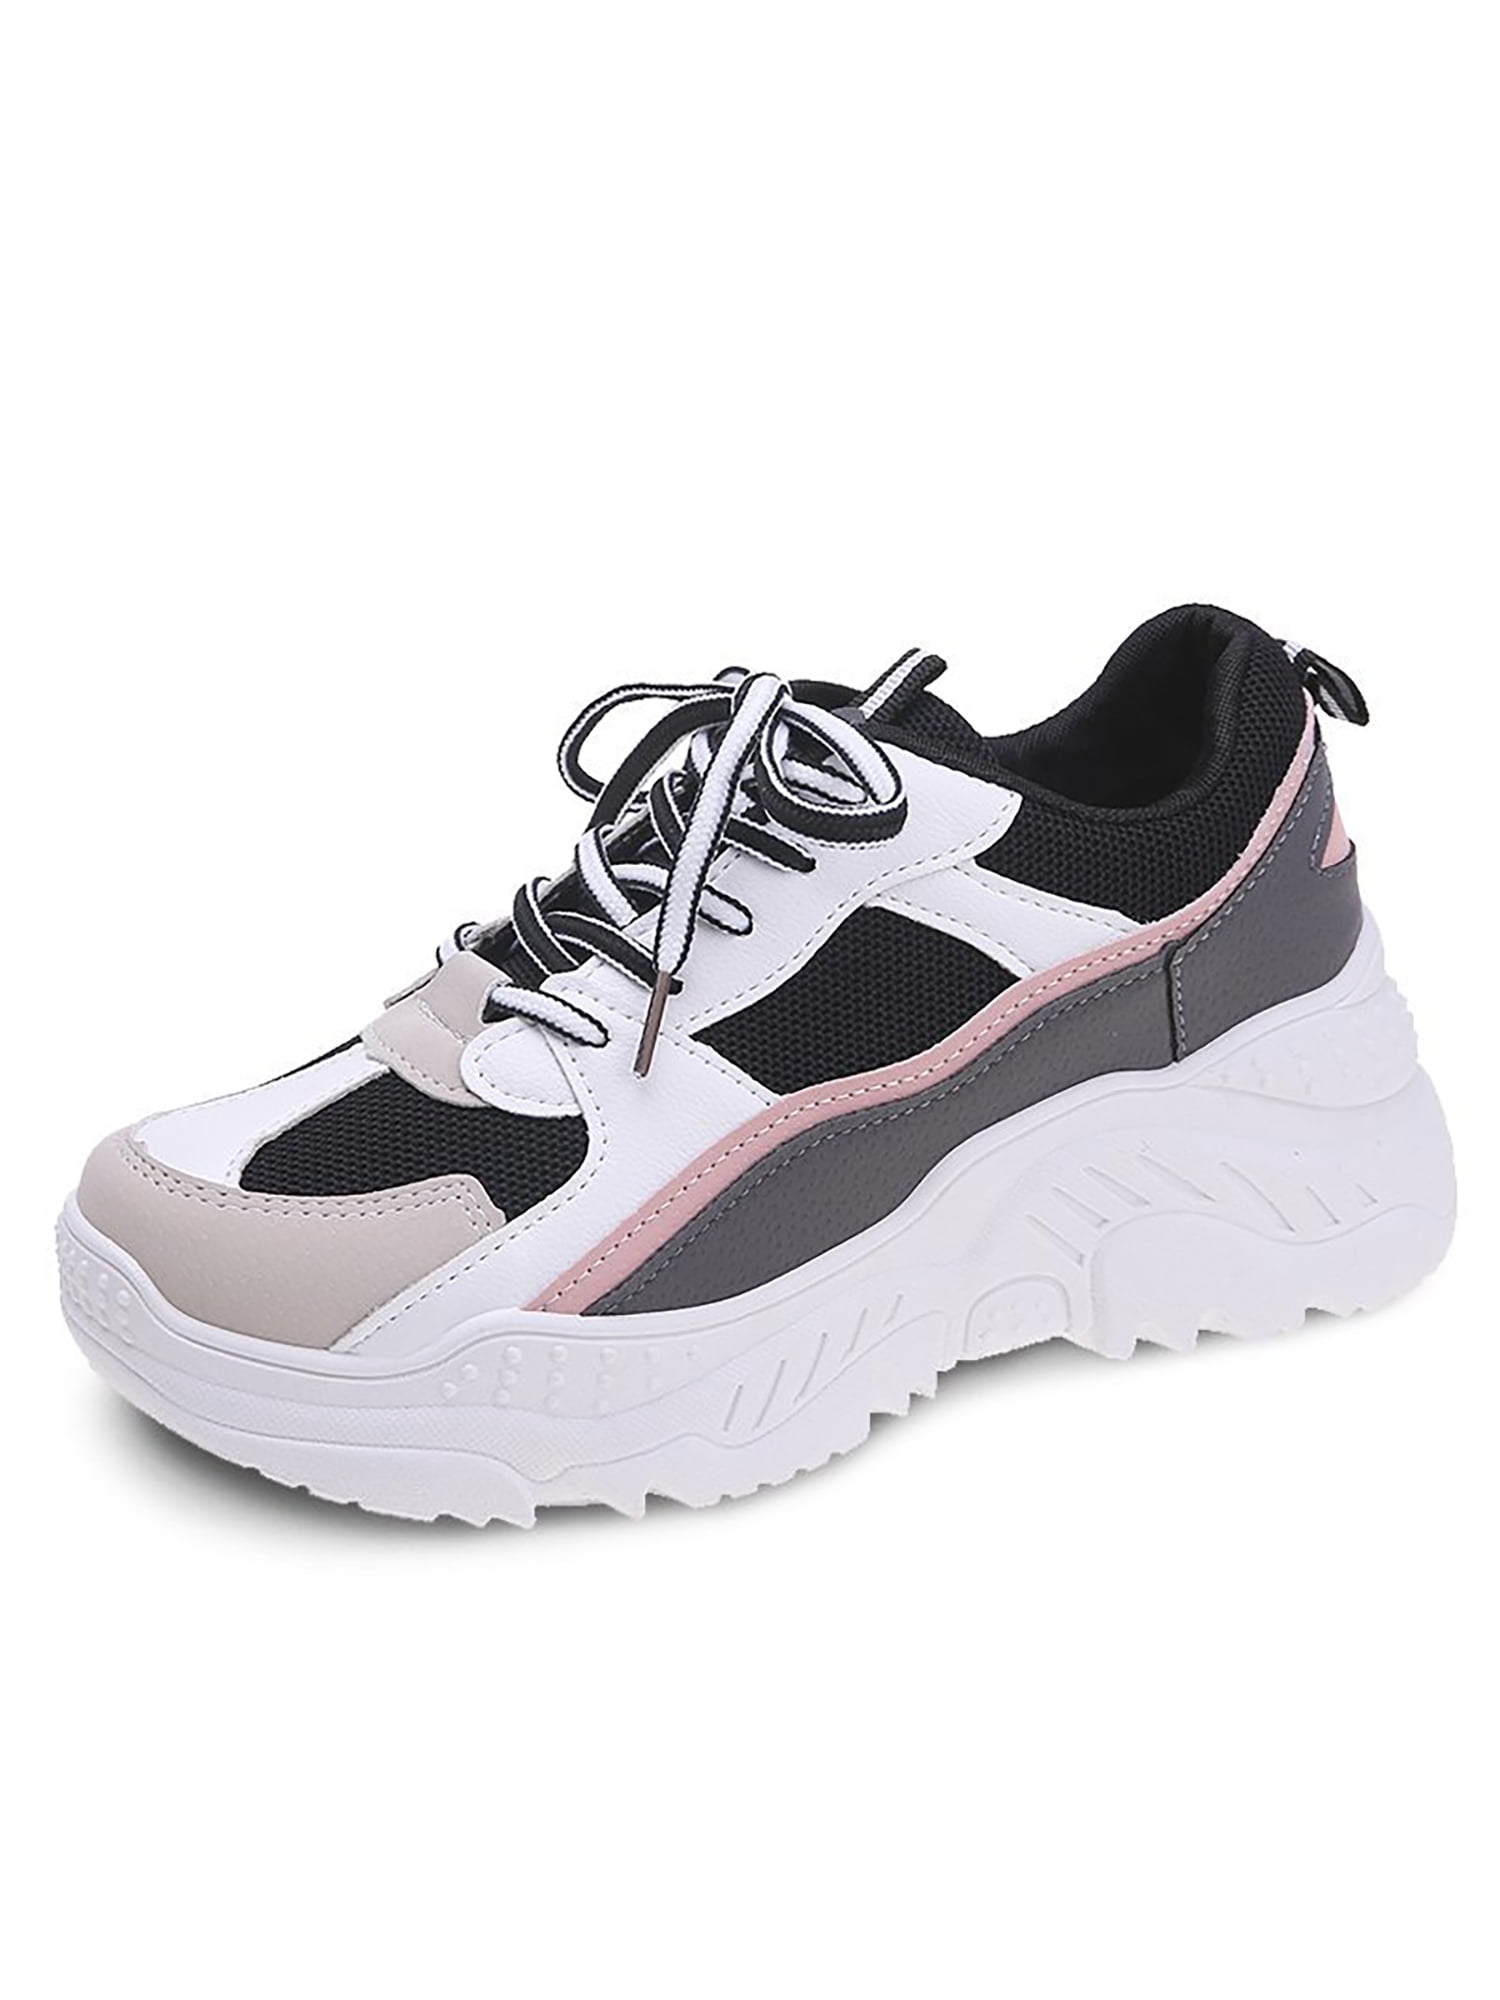 LUCKY STEP Womens Chunky Sneakers Fashion Tennis Lace Up Dad Cushion Running Shoes